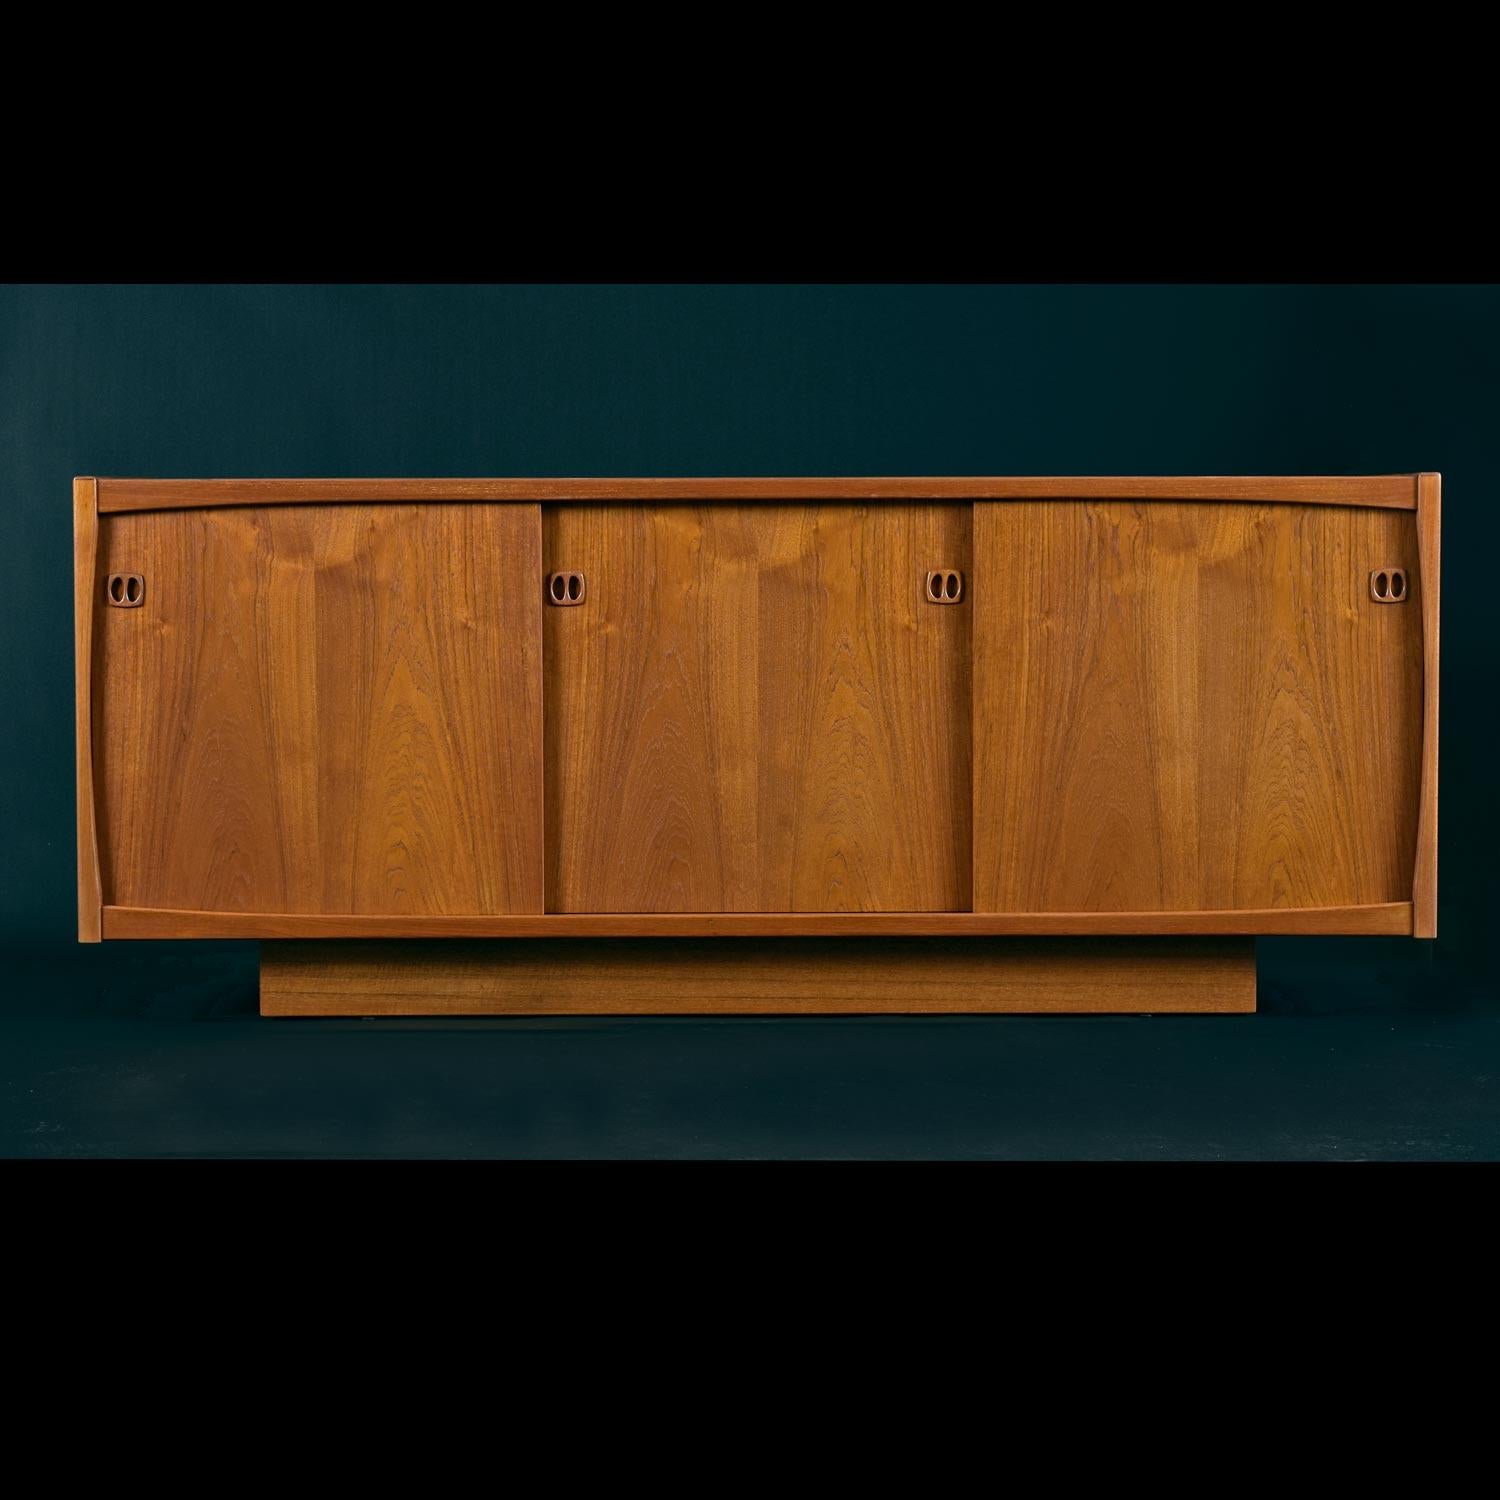 Vintage Danish Modern credenza by Laurits M Larsen. Ideal for use as a sideboard or entertainment center. Three sliding doors at front allow easy access to cabinet interior. Minimalist facade is accented by elegantly sculpted recessed teak pulls.